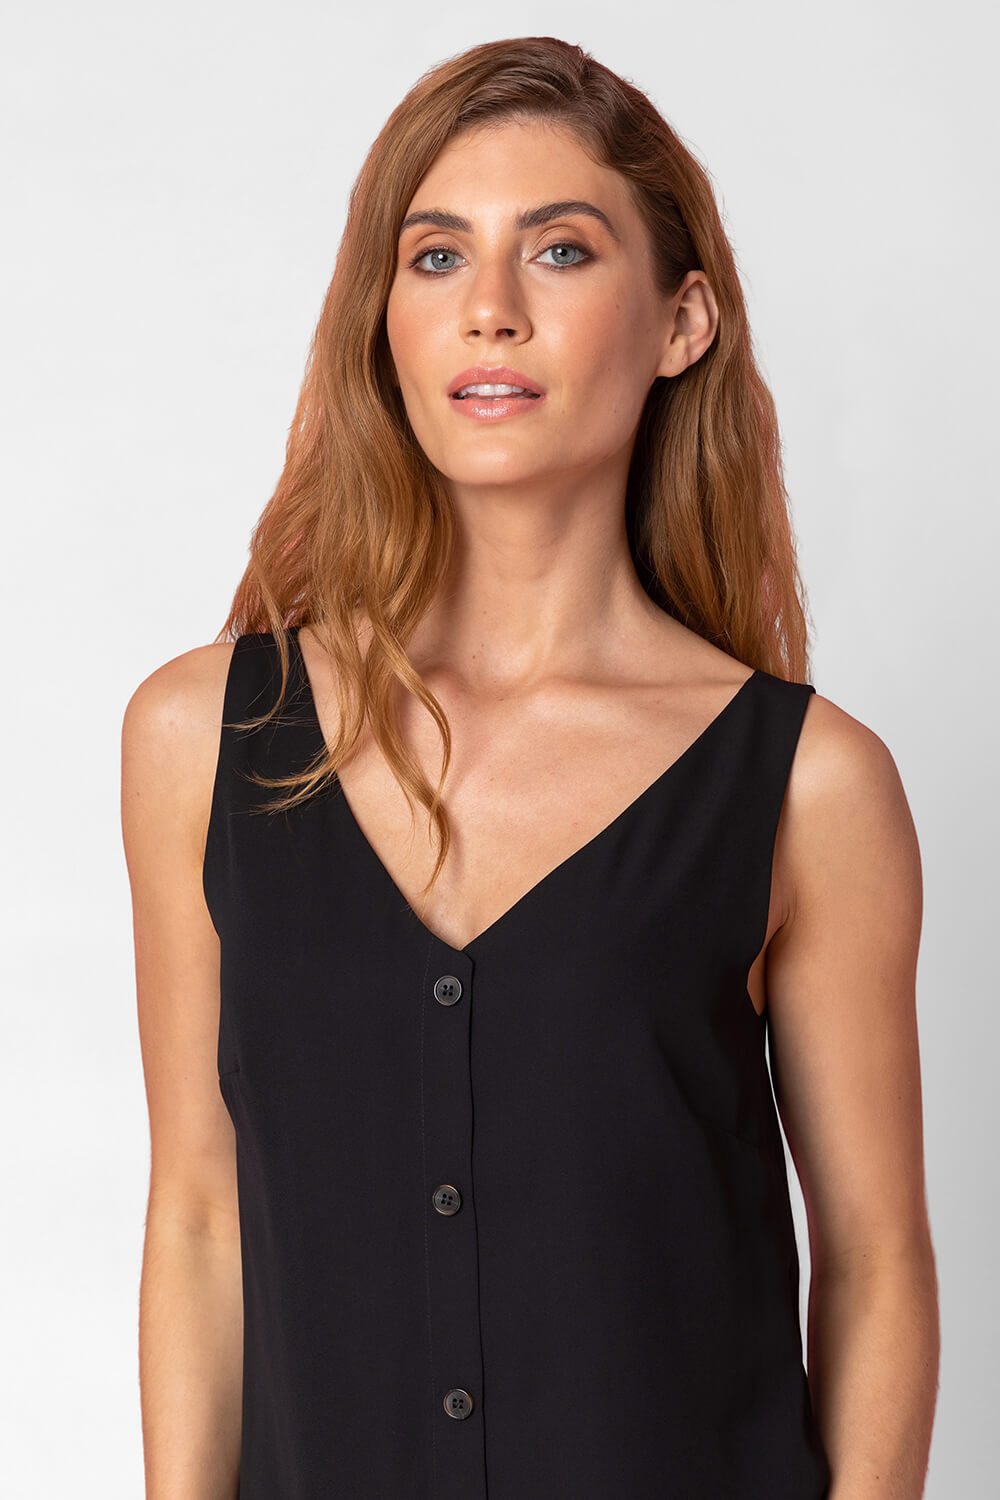 Black Button Front Sleeveless Top, Image 4 of 4